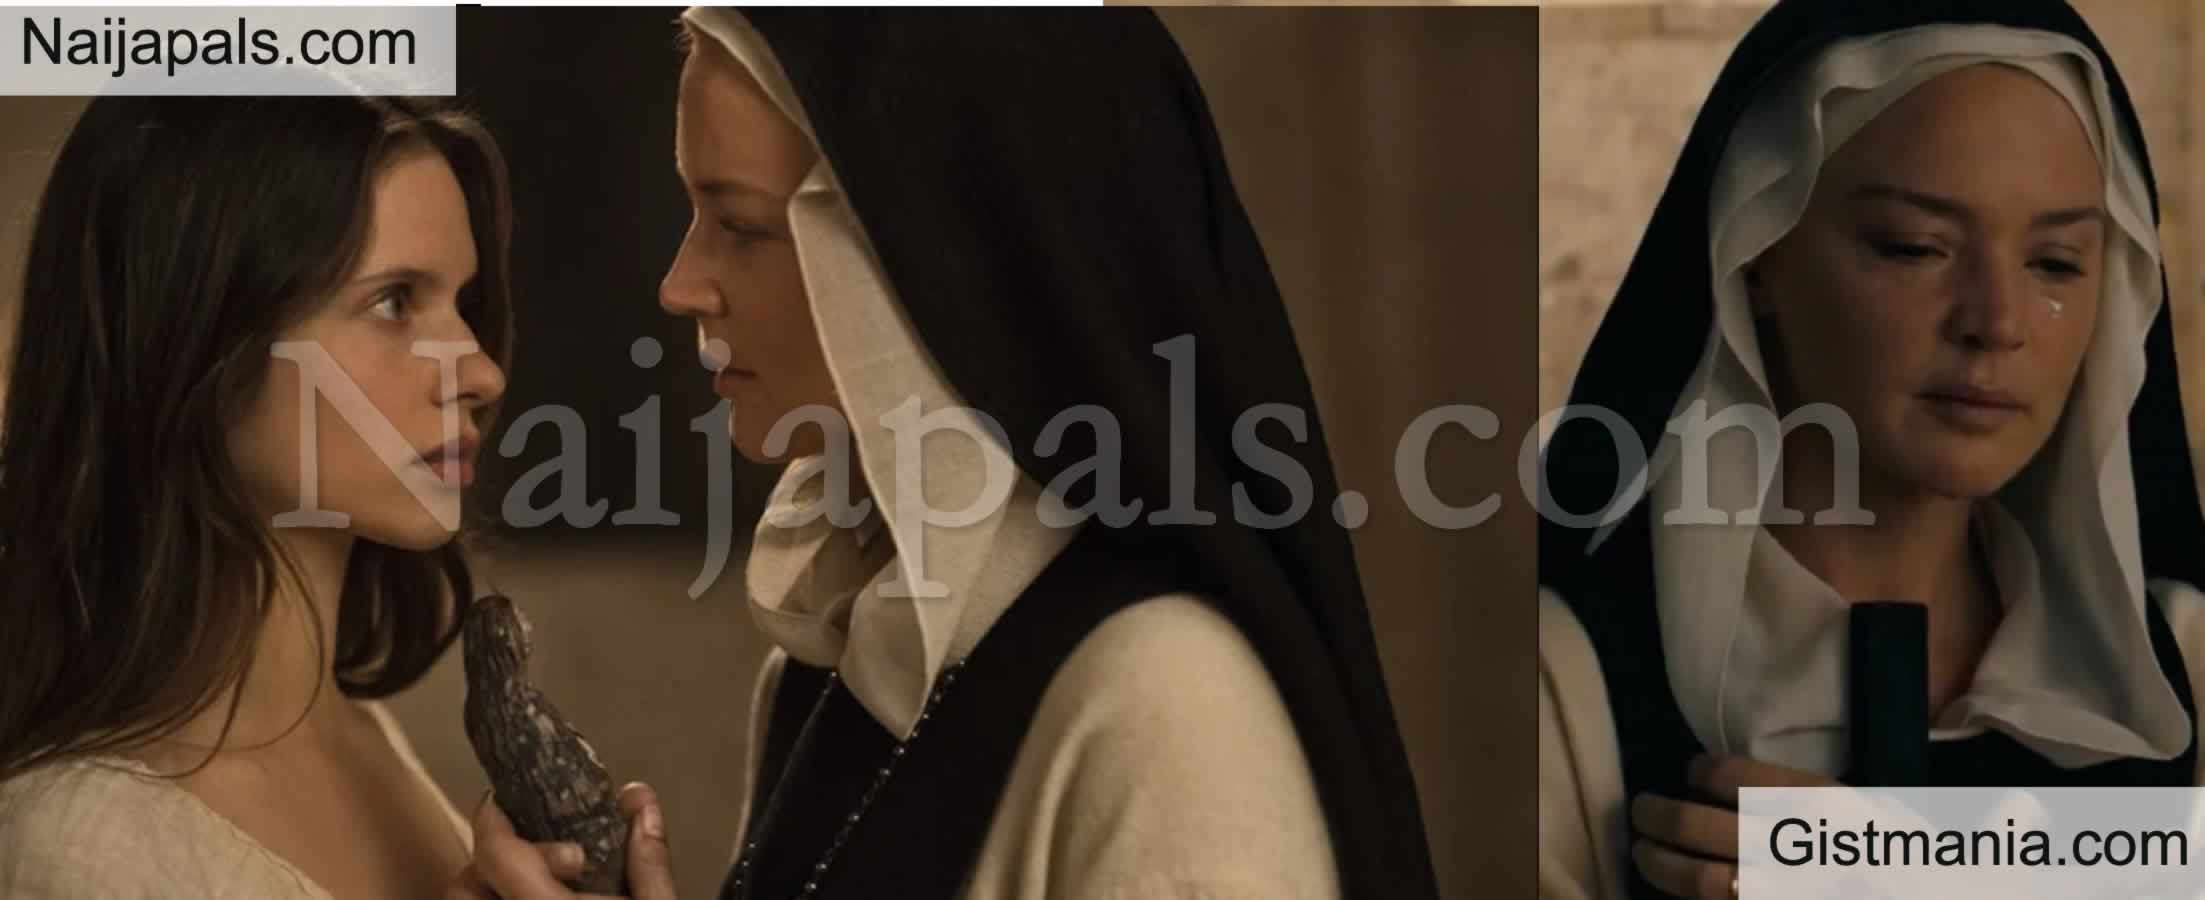 Catholic Church In Ireland Moves To Ban Release Of Film That Portrays A Lesbian Nun Video